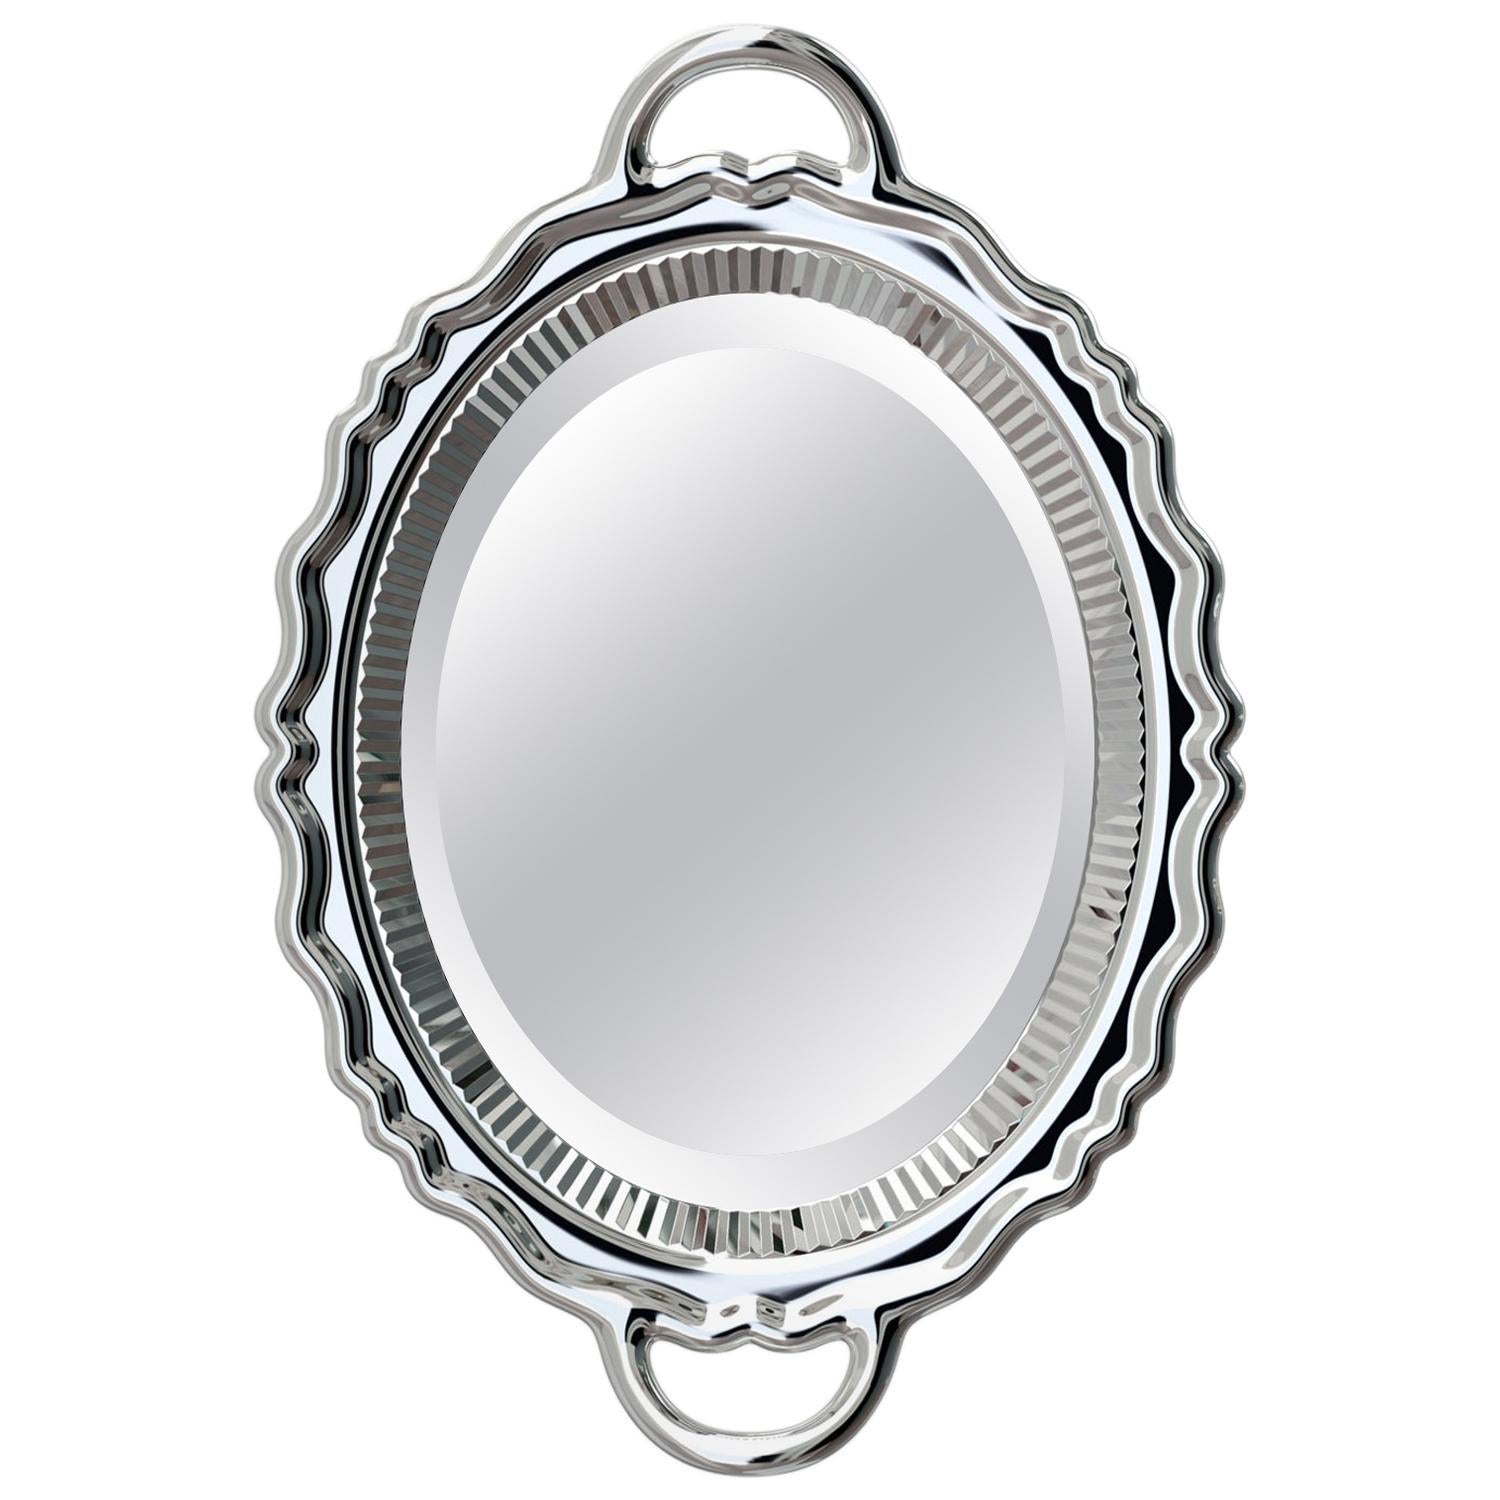 Silver Metal Finish Plateau Mirror, Designed by Studio Job, Made in Italy